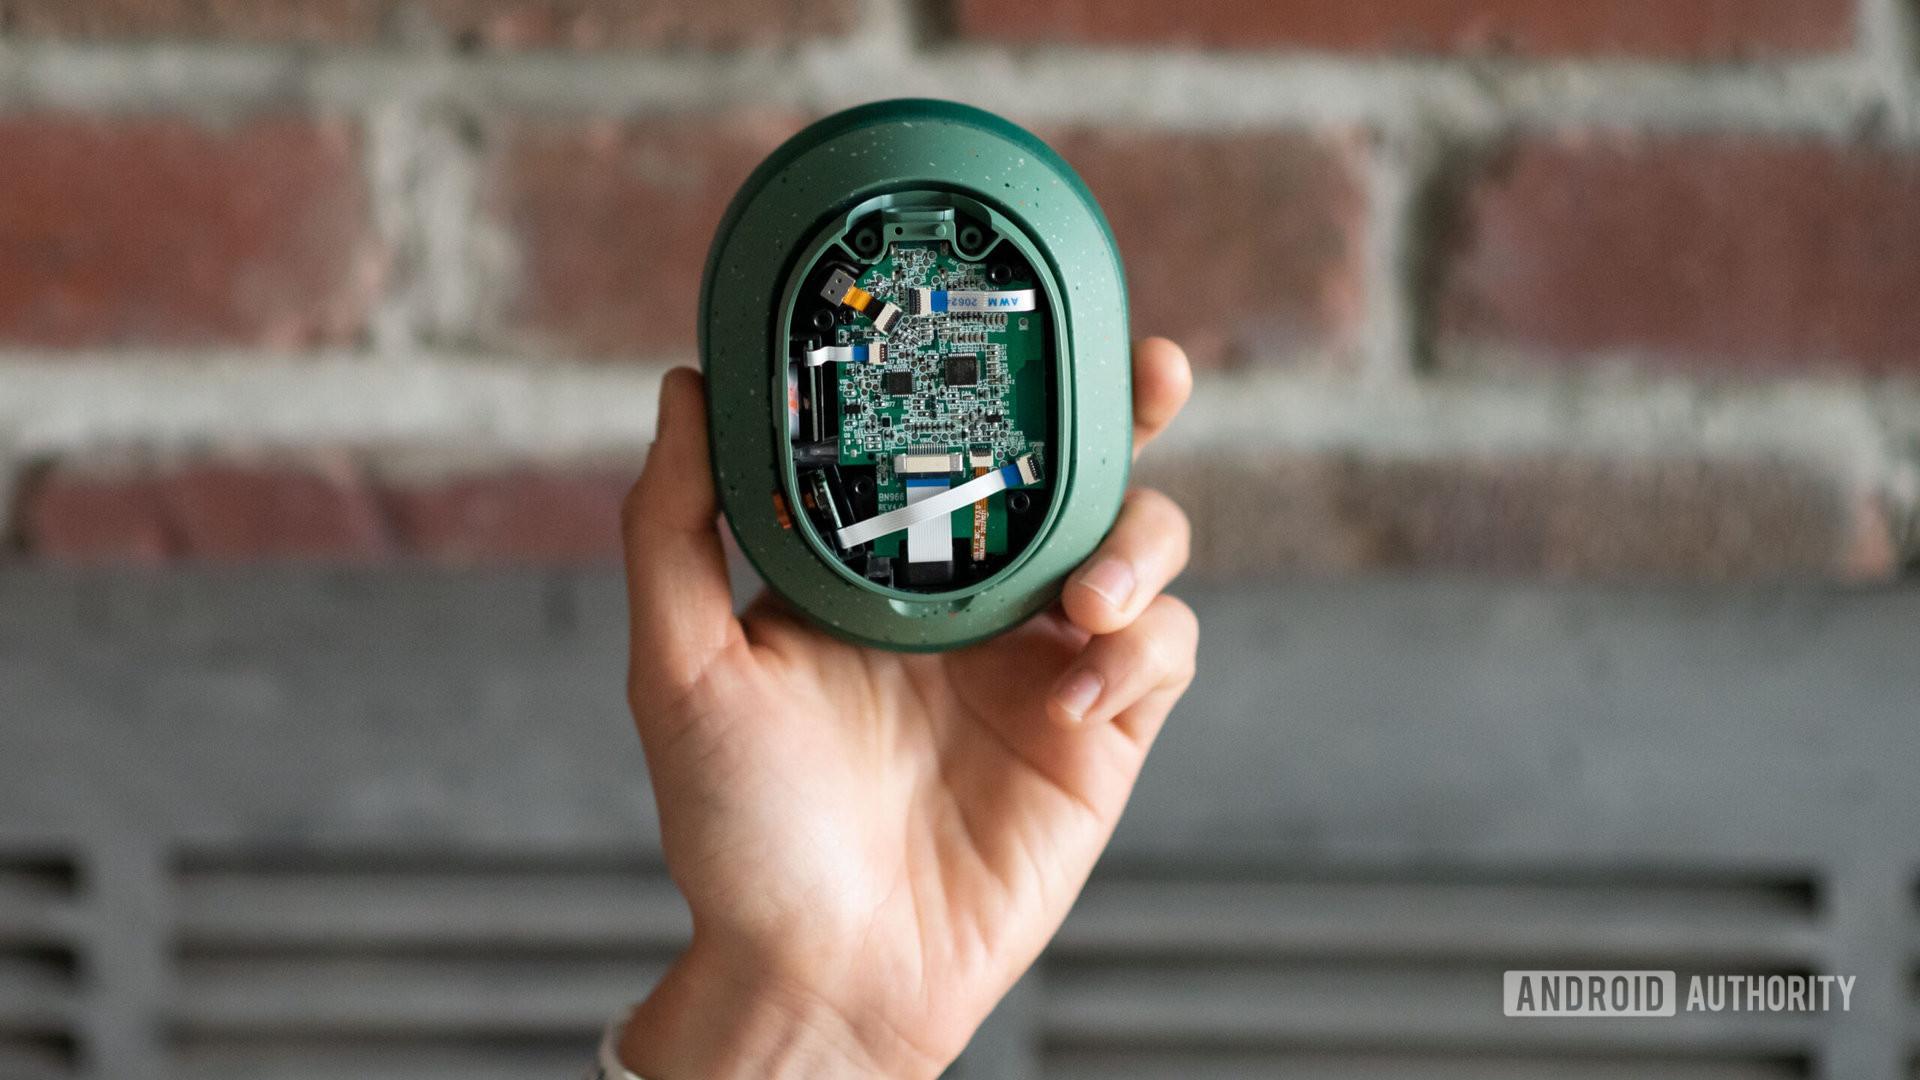 A hand holds up the Fairphone Fairbuds XL right ear cup module with the PCB in view.